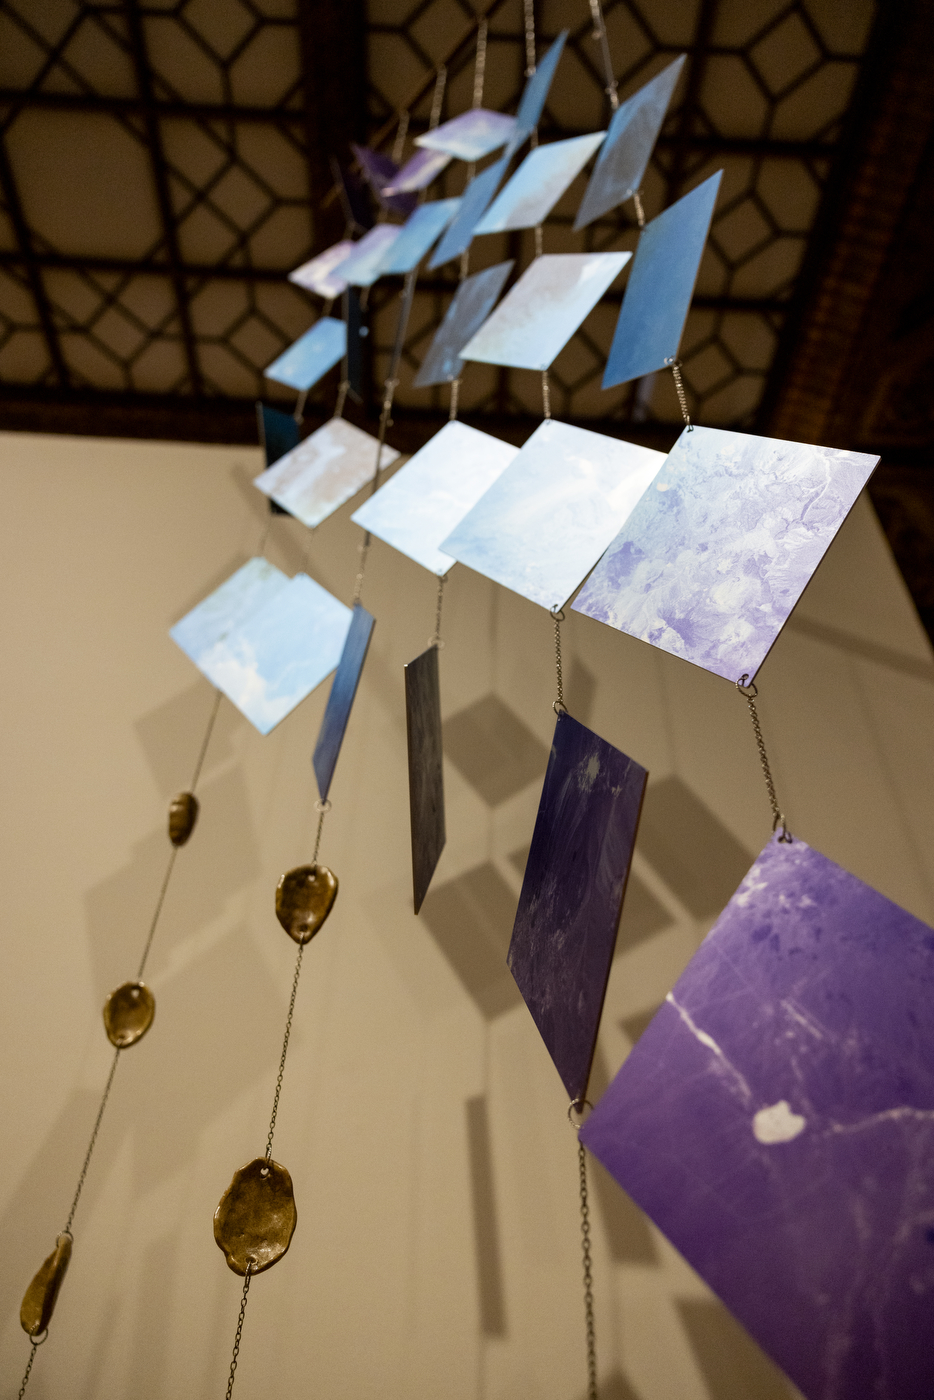 Blue and purple triangles and teardrop-shaped gems strung on wire up to the ceiling of an art gallery.